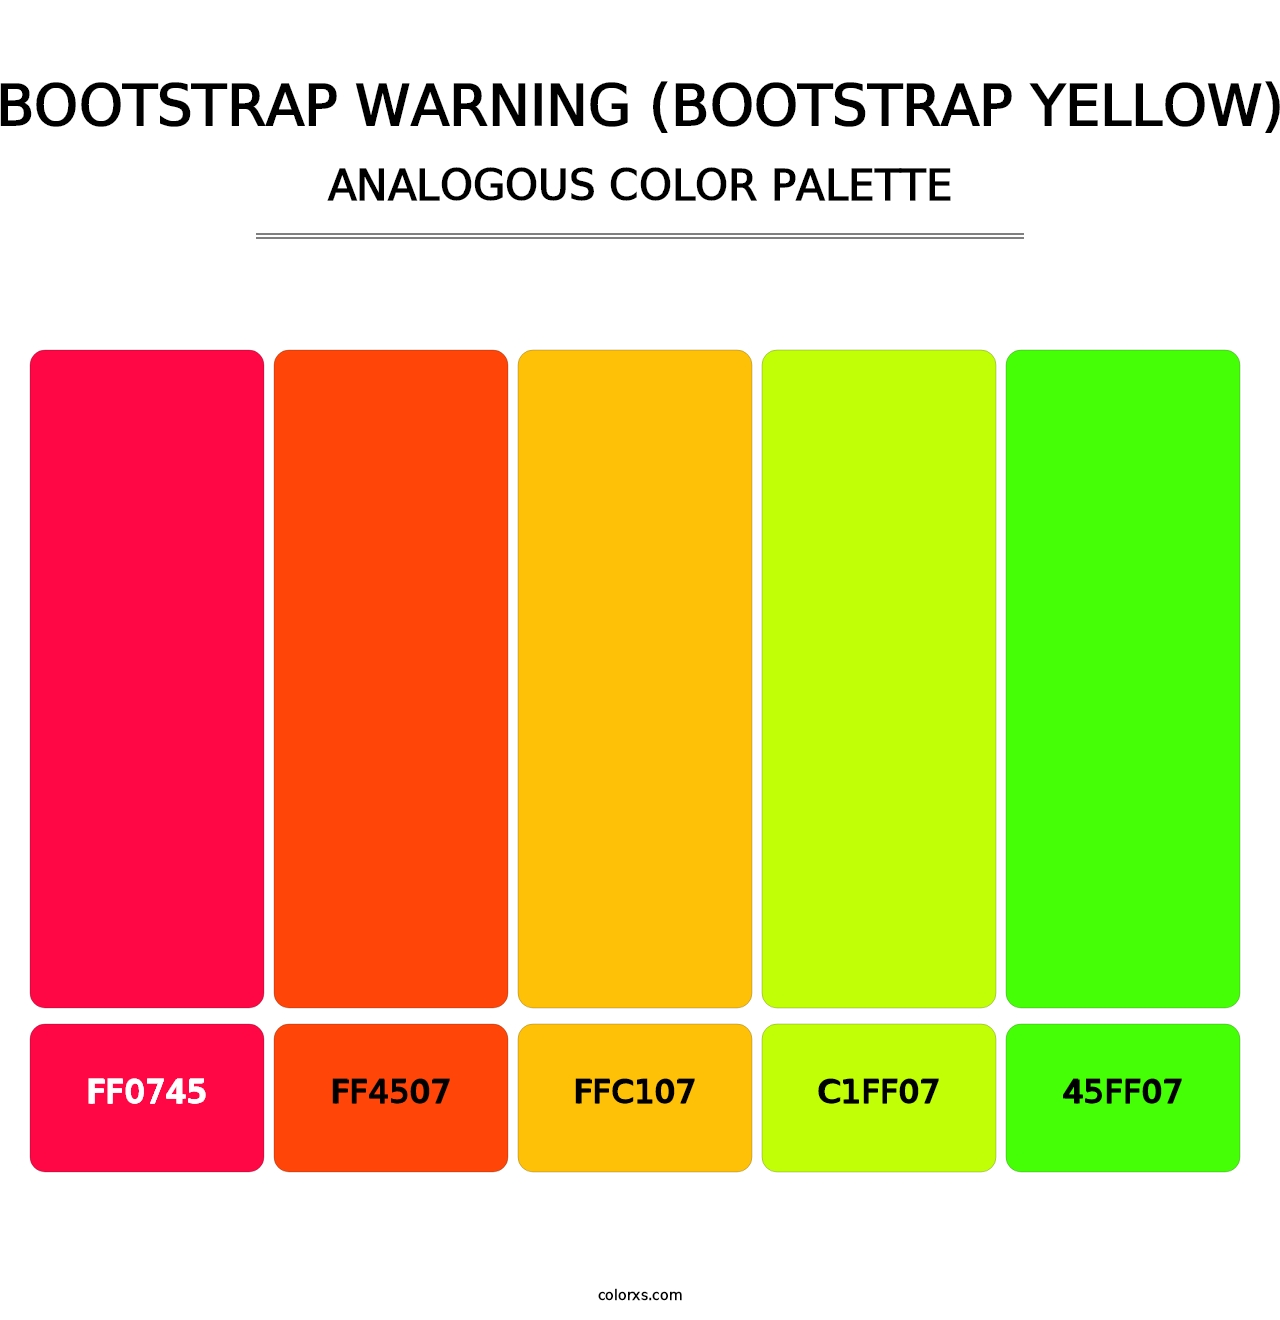 Bootstrap Warning (Bootstrap Yellow) - Analogous Color Palette